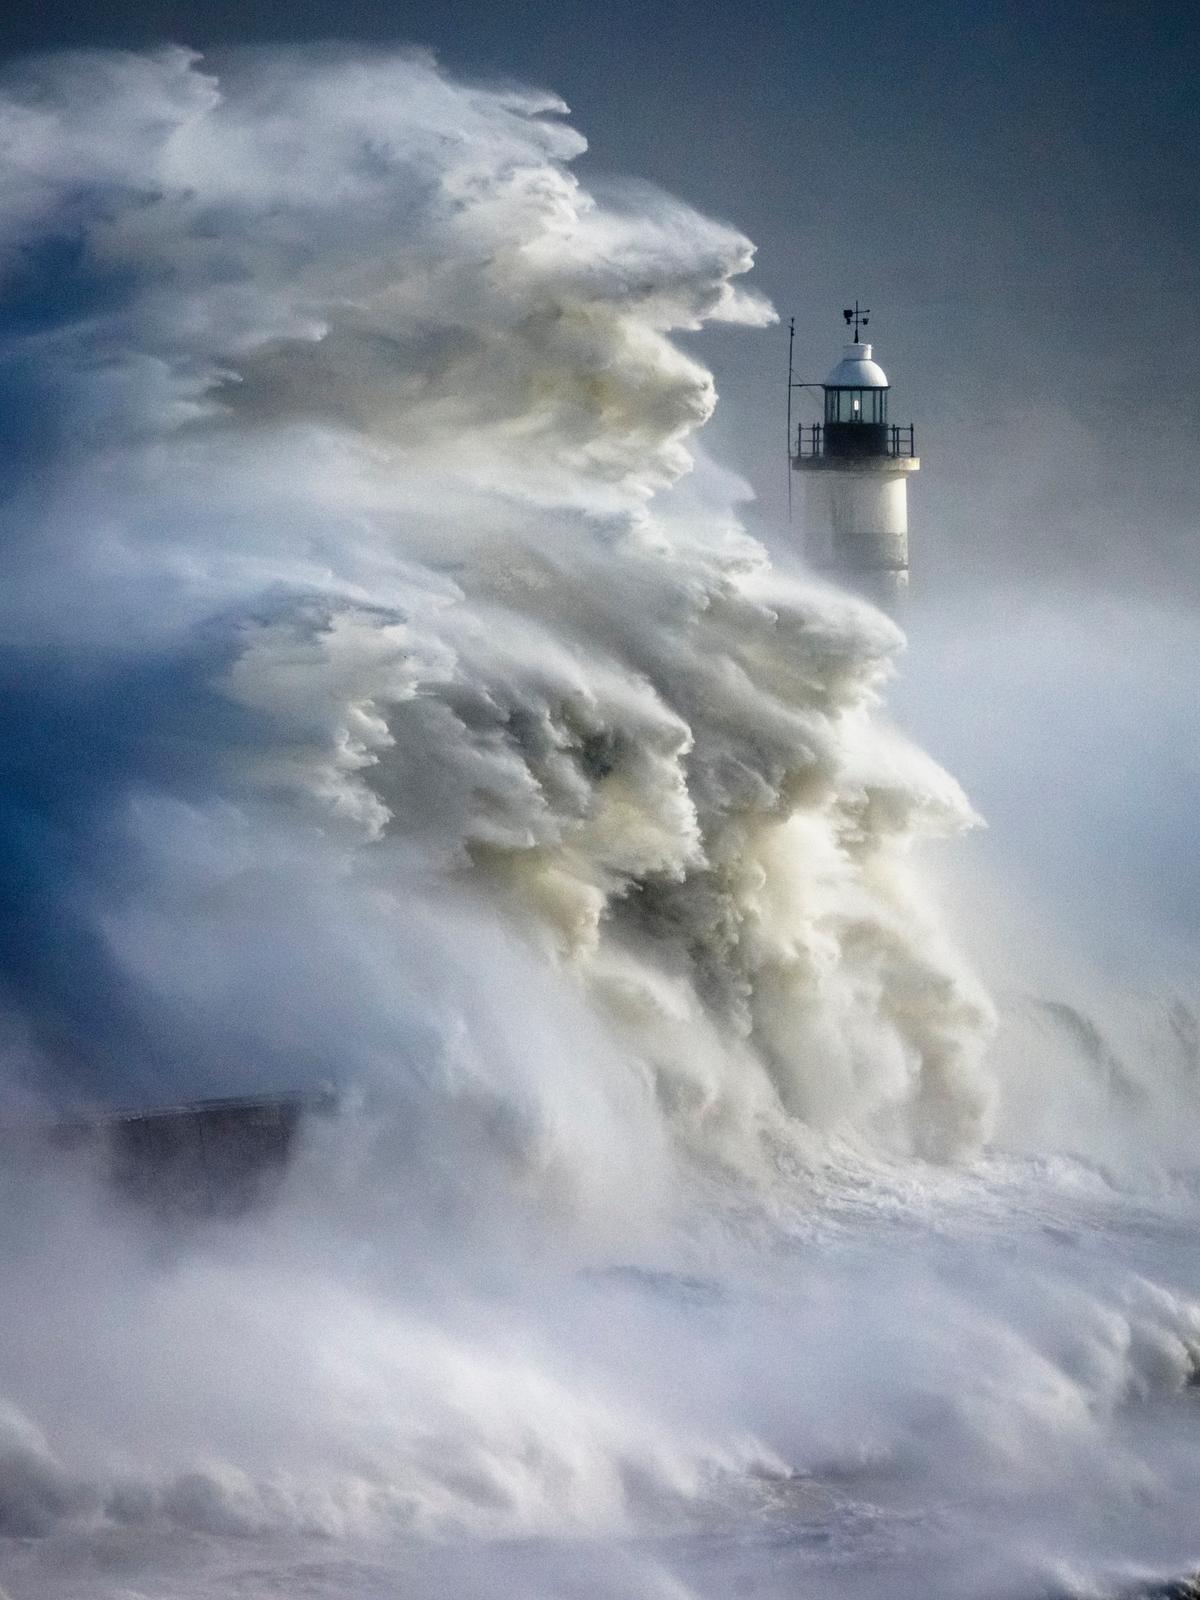 "Storm Eunice" by Christopher Ison. (Courtesy of Christopher Ison/<a href="https://www.facebook.com/RMetSoc/">Royal Meteorological Society</a>)